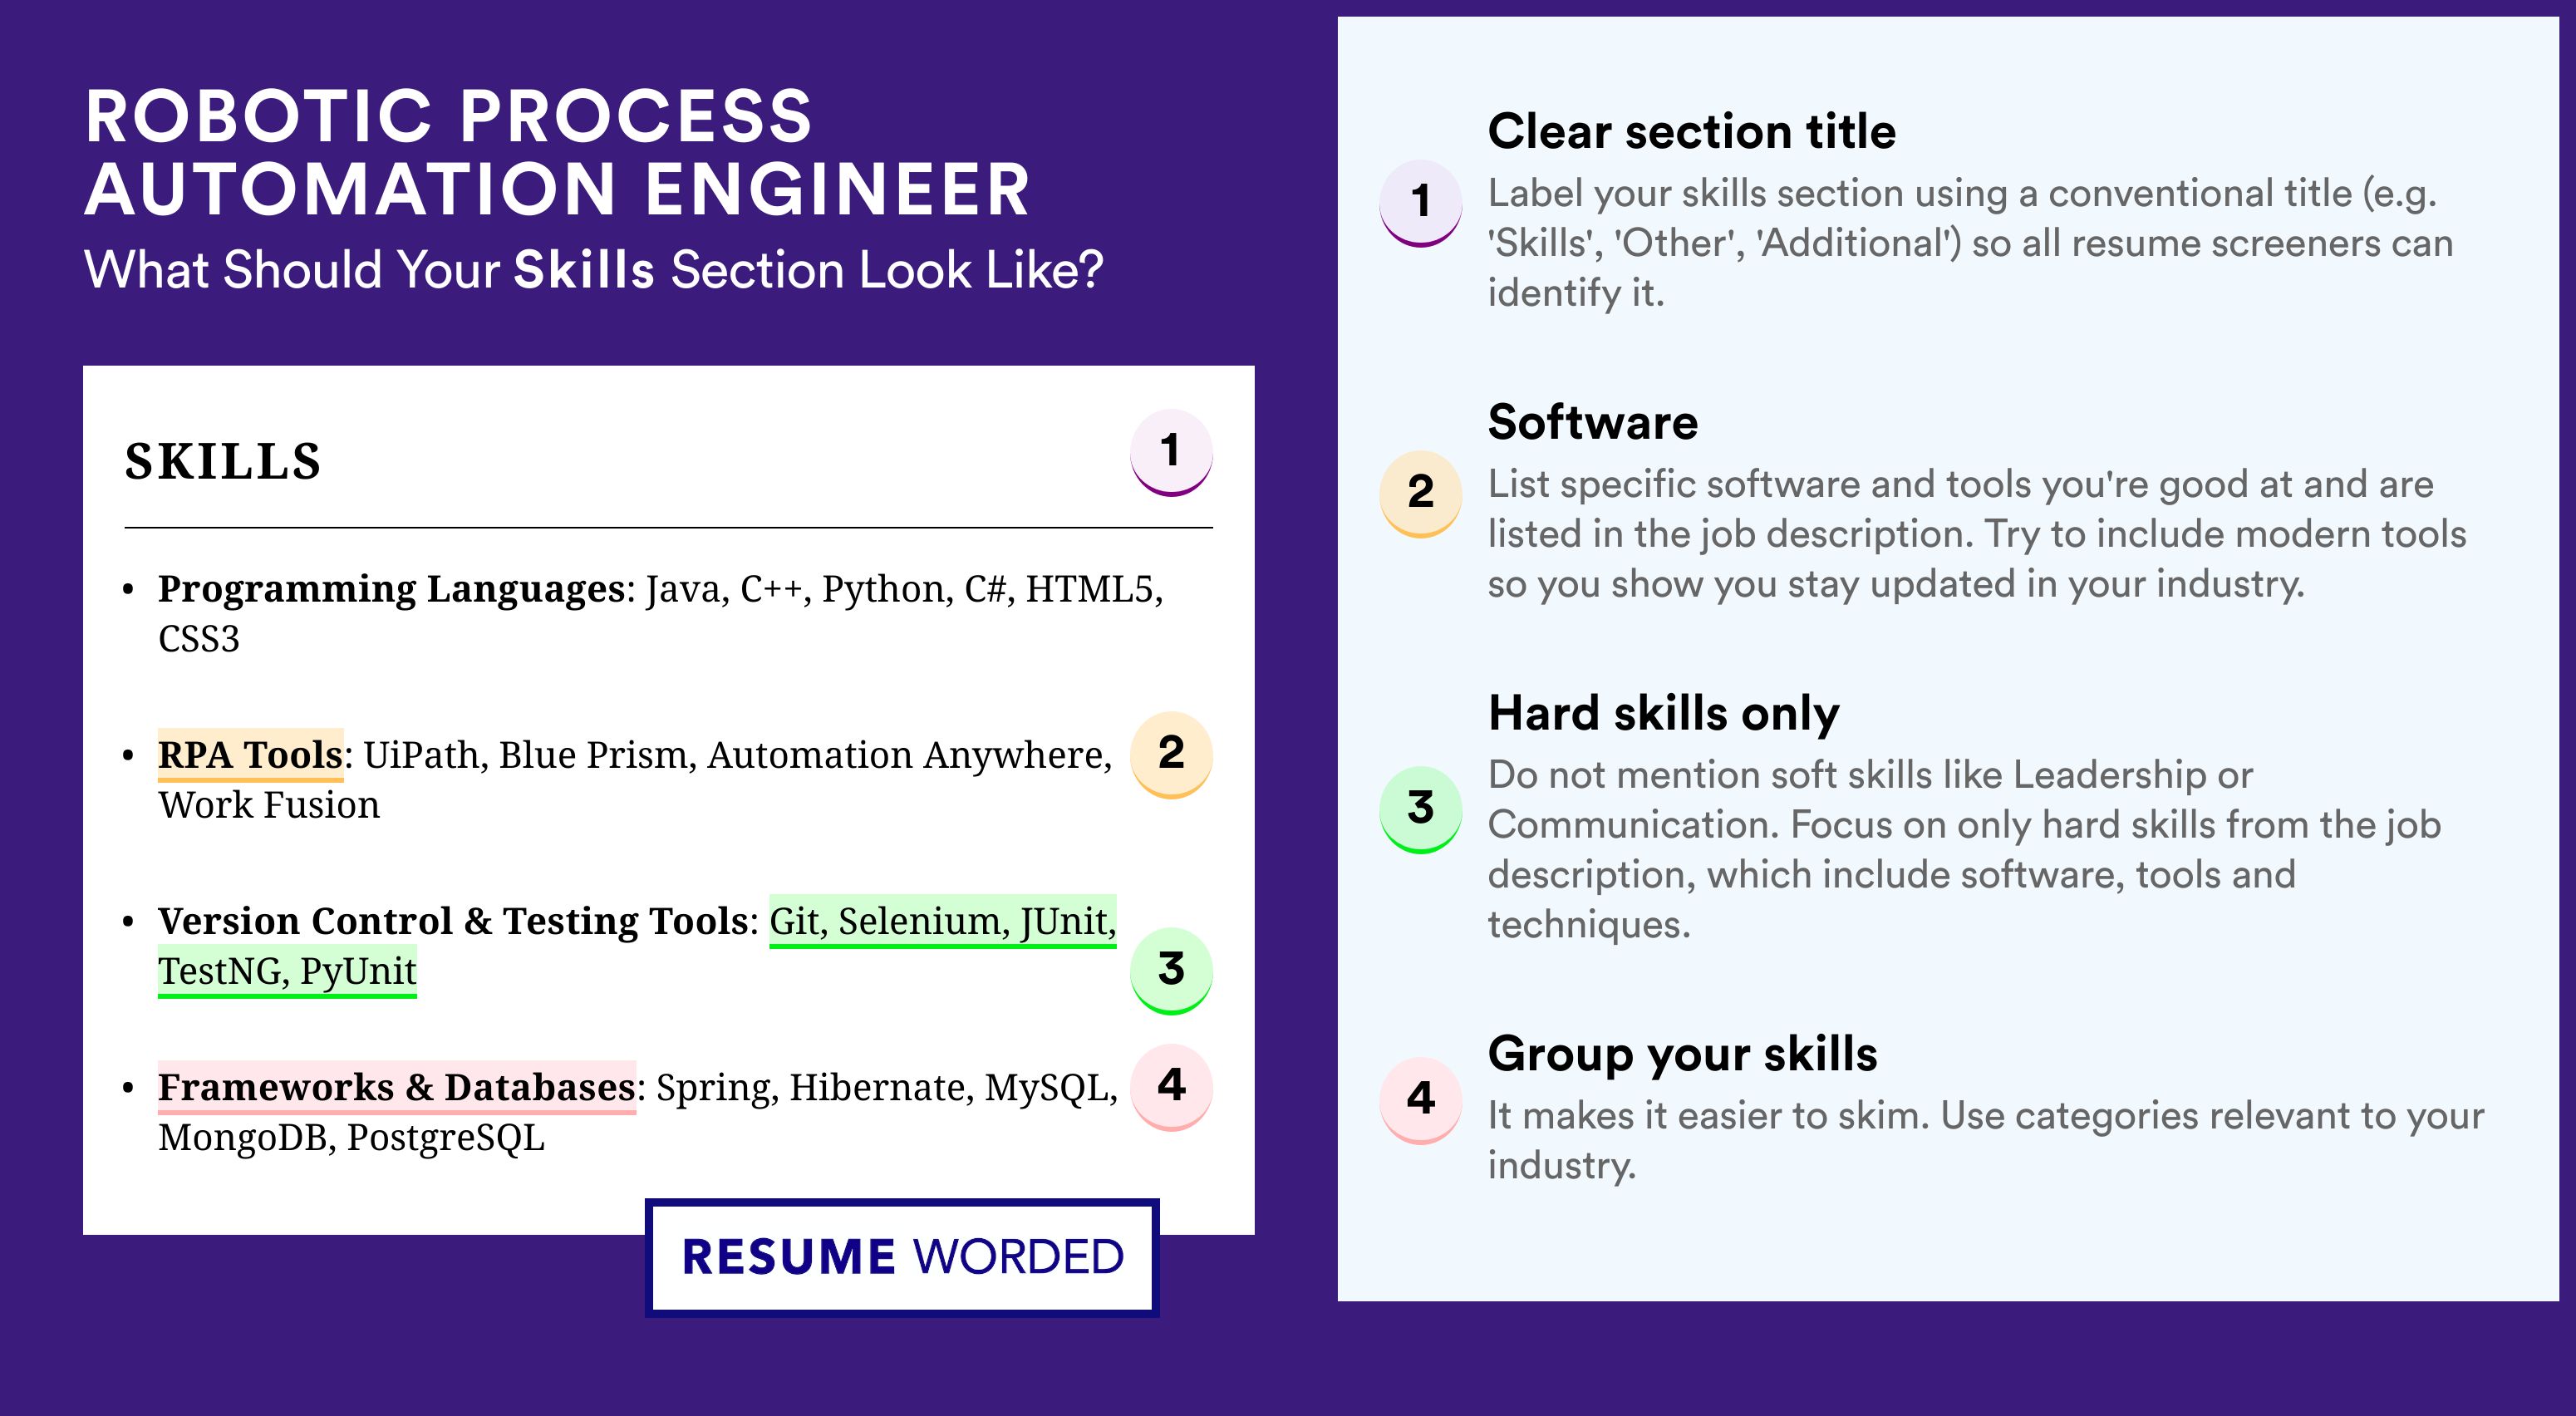 How To Write Your Skills Section - Robotic Process Automation Engineer Roles